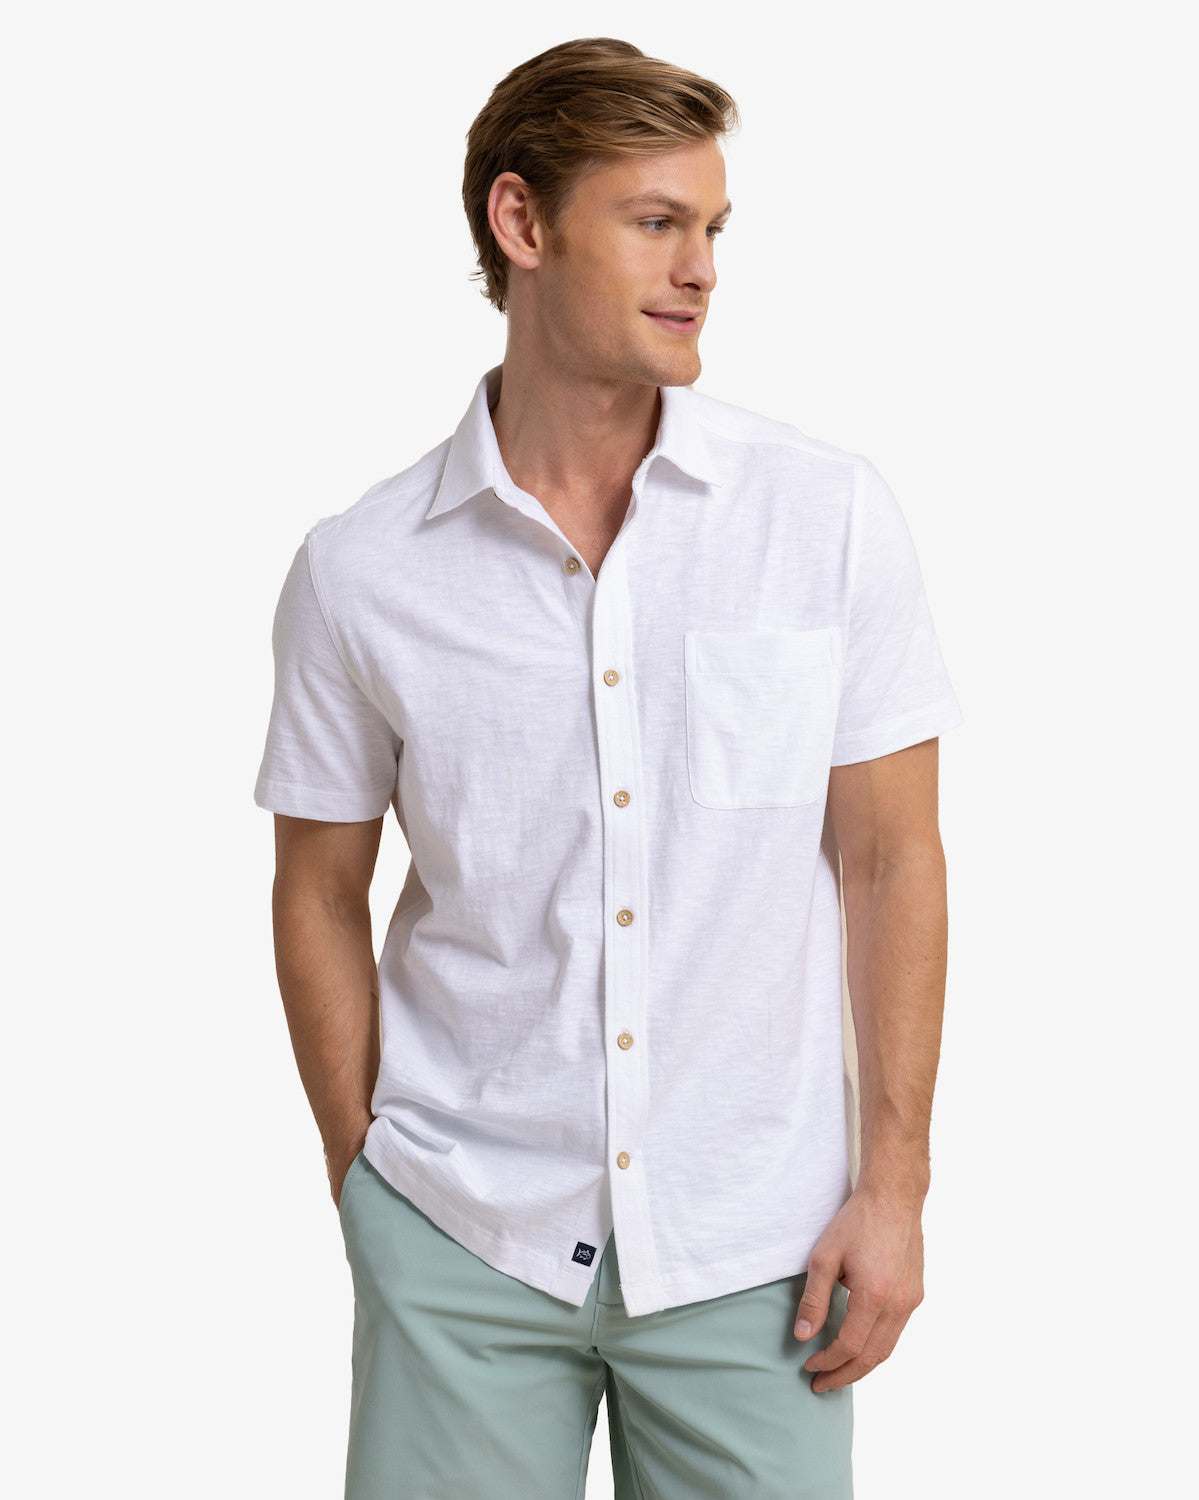 Southern Tide - Beachcast Solid Knit Sportshirt (Classic White)